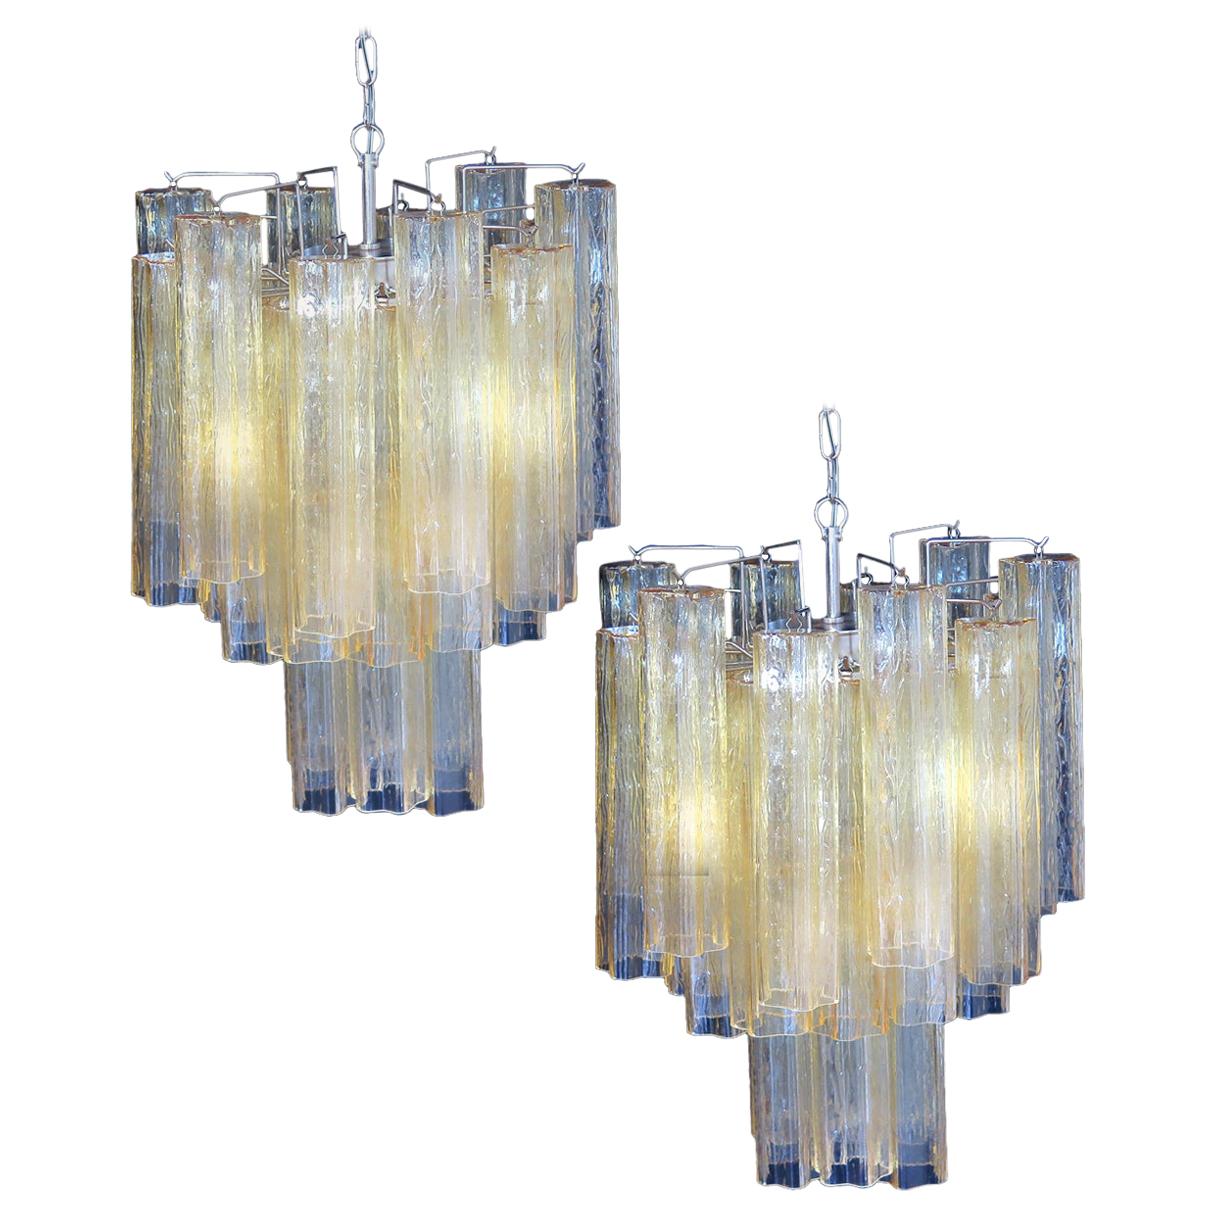 Trio Gold Glass Tube Chandeliers, Murano, 1970s For Sale 6